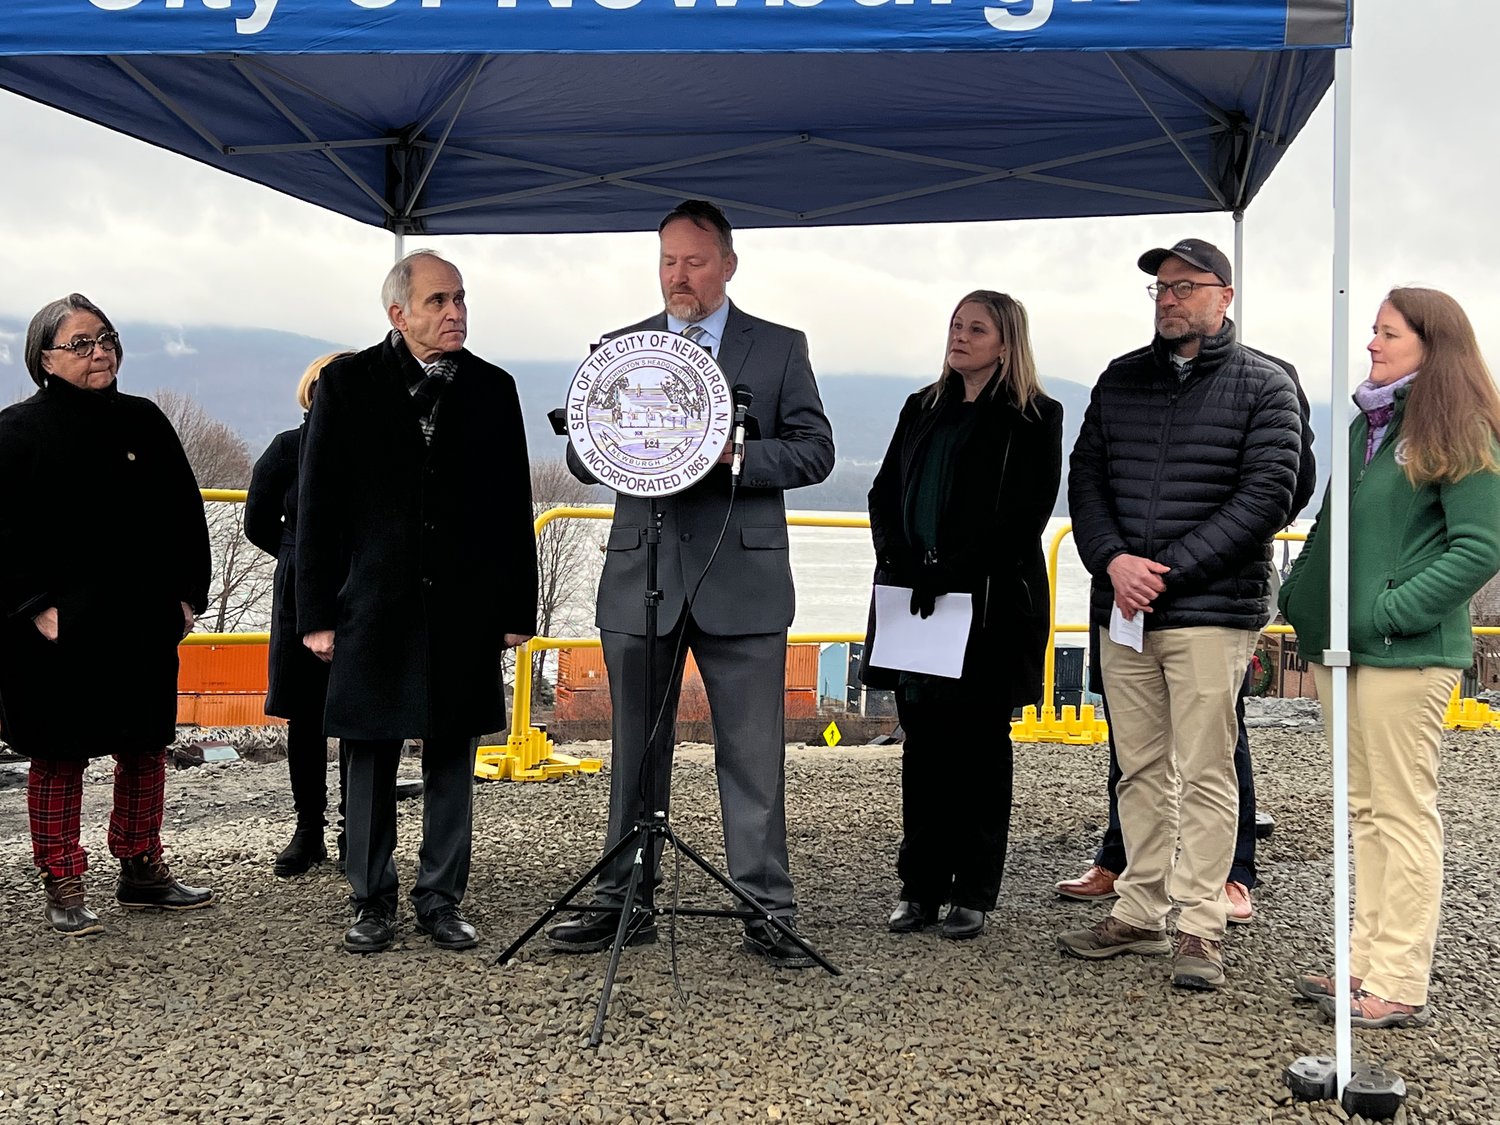 City of Newburgh Engineer Jason Morris [center] joined by elected officials, city council members and additional state partners introduced to the media and public the new tunnel boring machine as part of the North Interceptor Sewer Improvements Project.